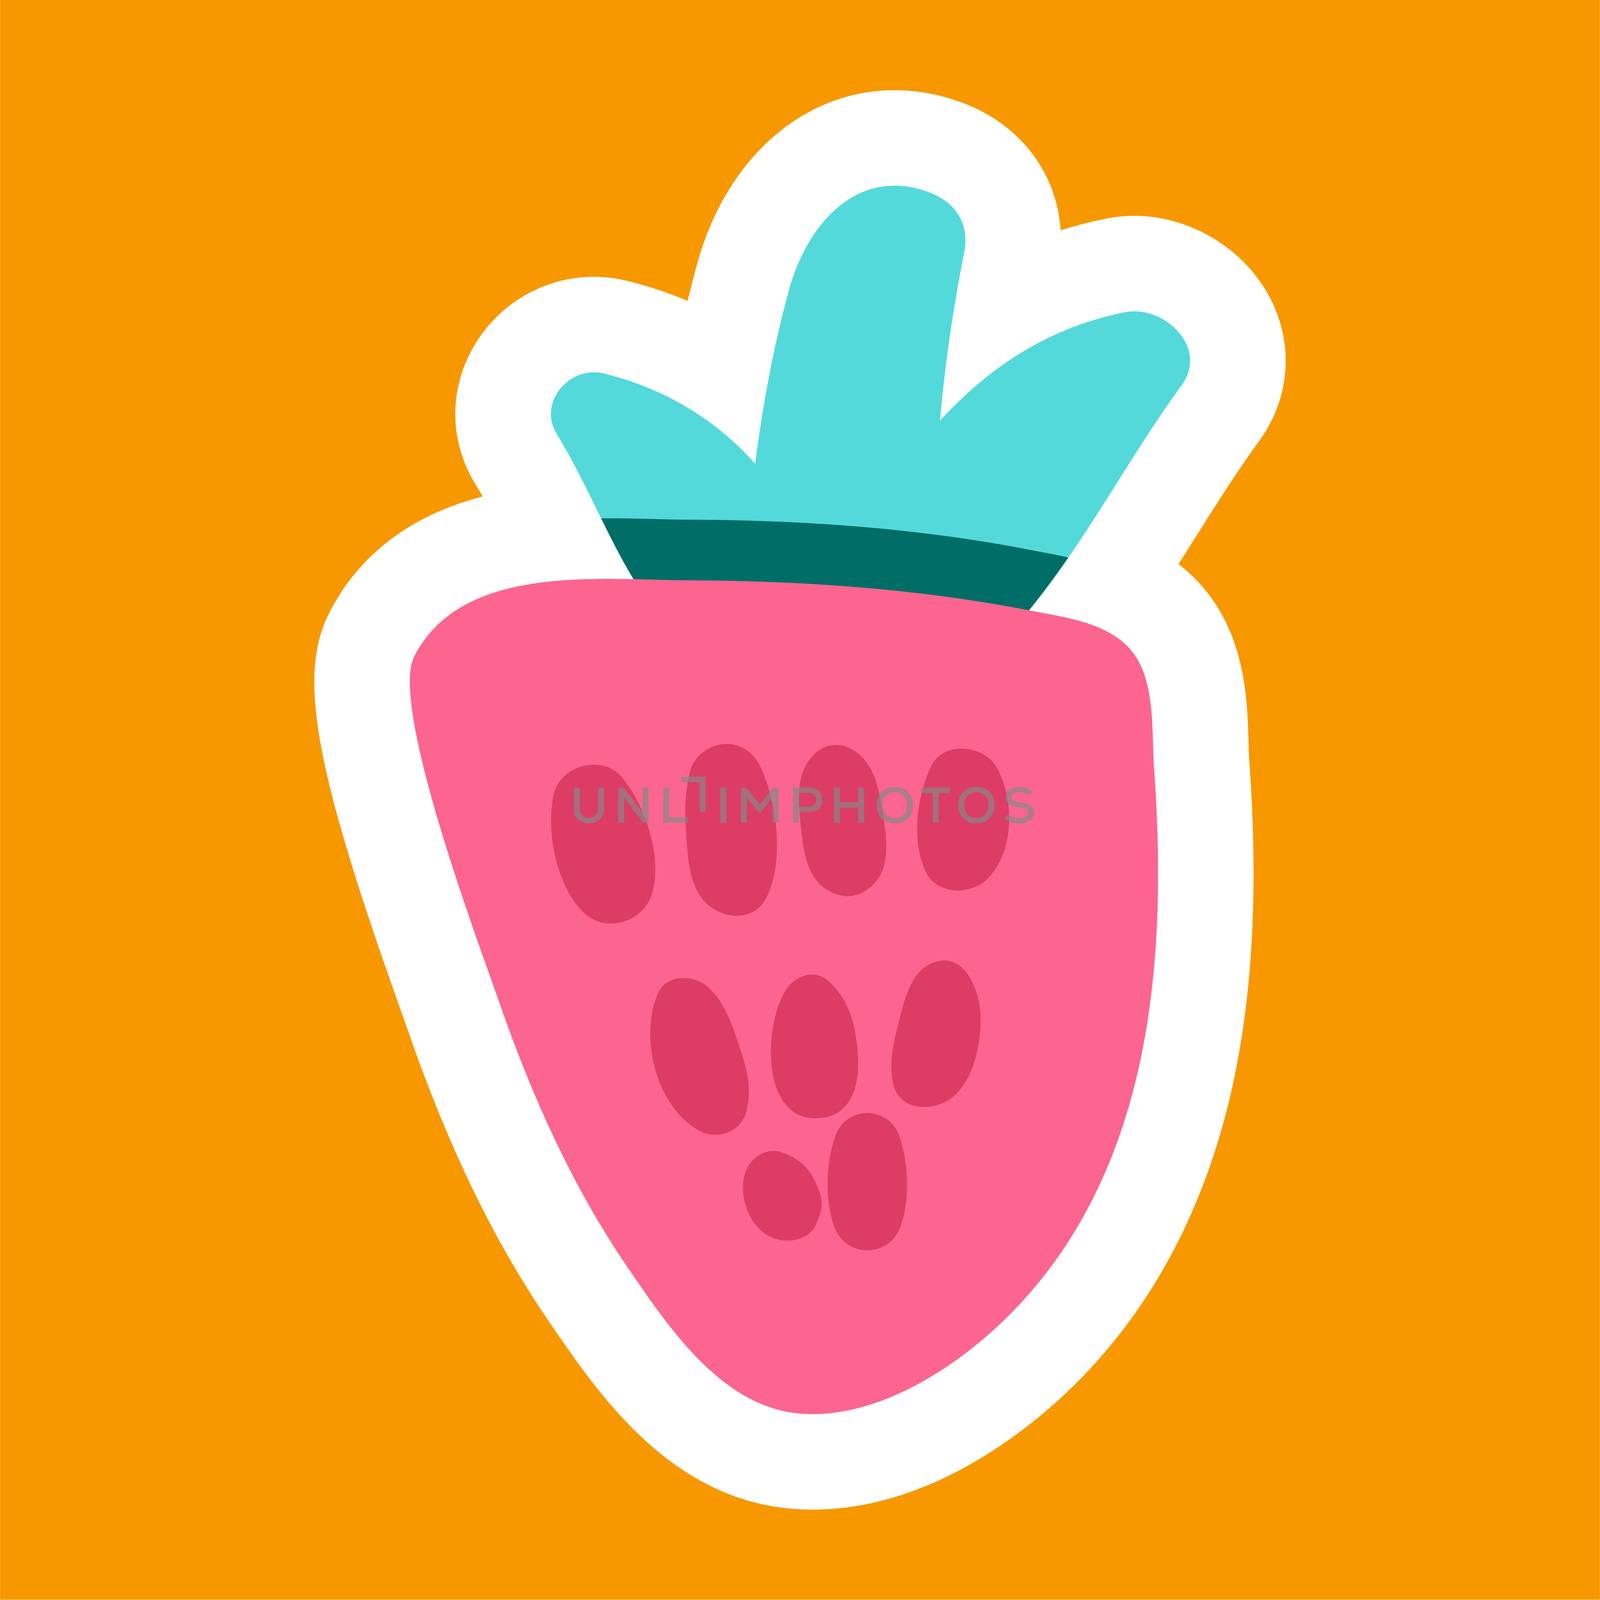 Strawberry cartoon sticker. Nice berry. Girl fashion patch. Sweet and tasty natural food icon. Vector